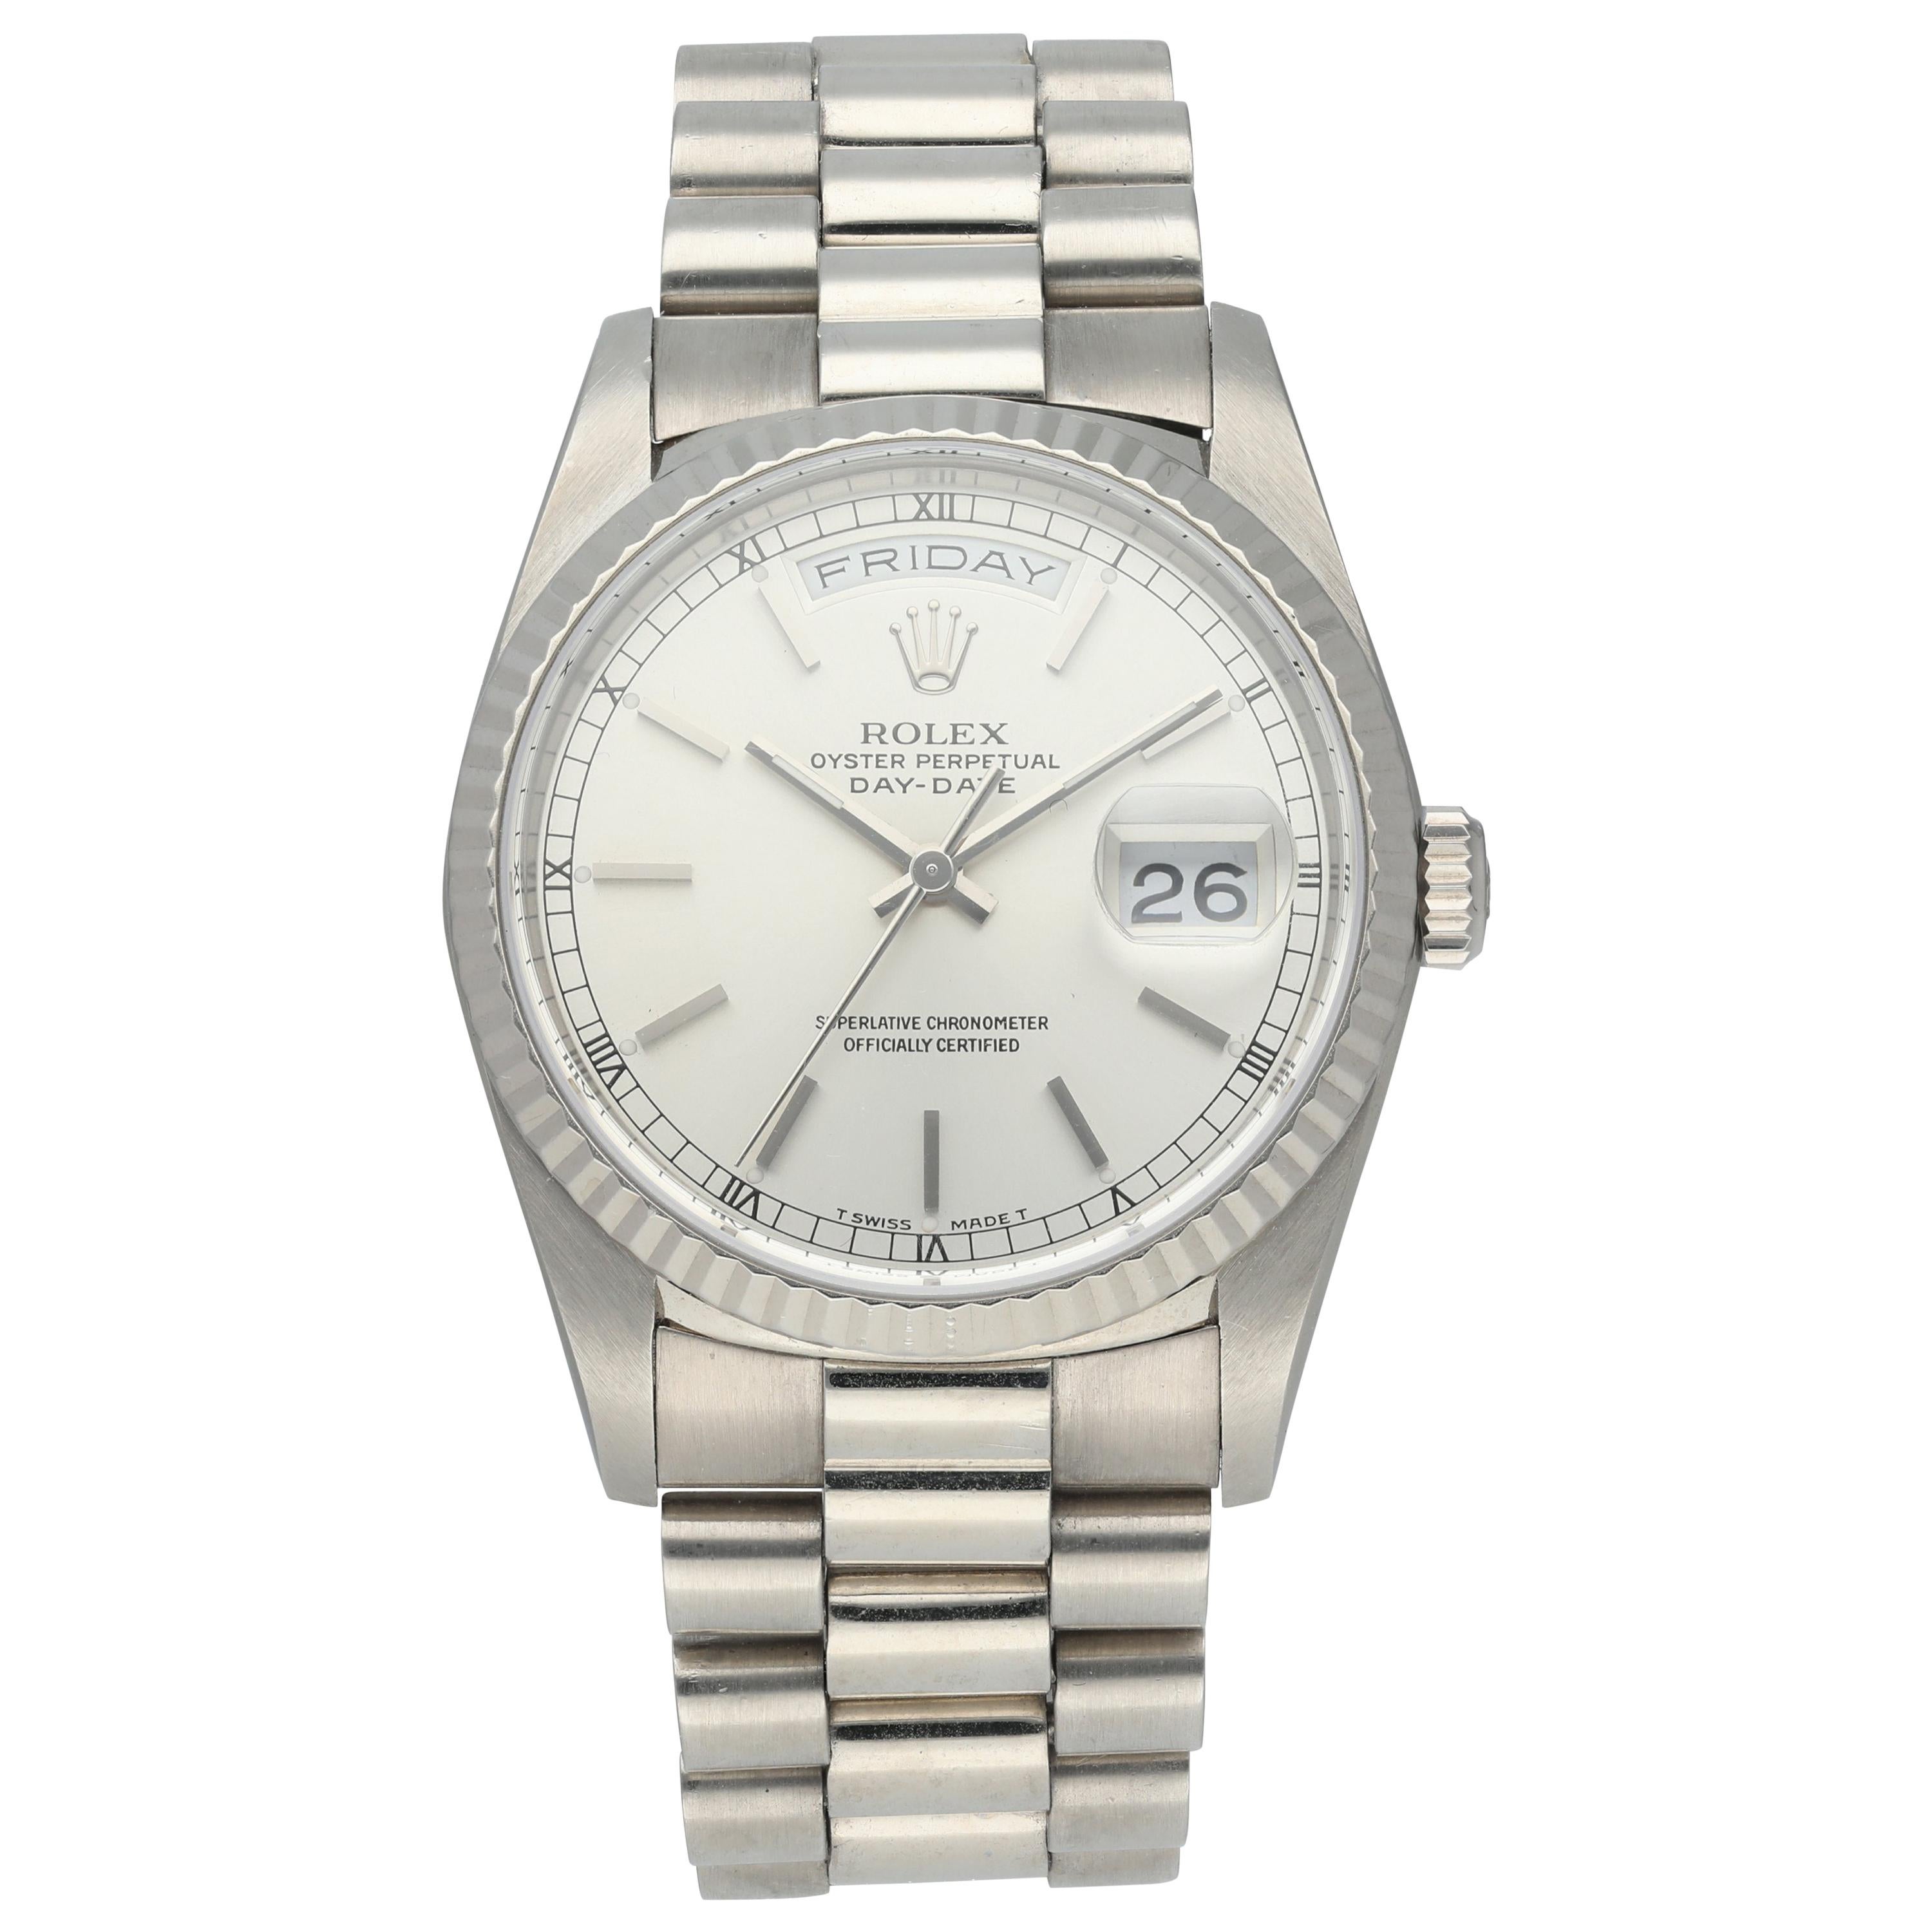 Rolex Day-Date President 18239 White Gold Men's Watch For Sale